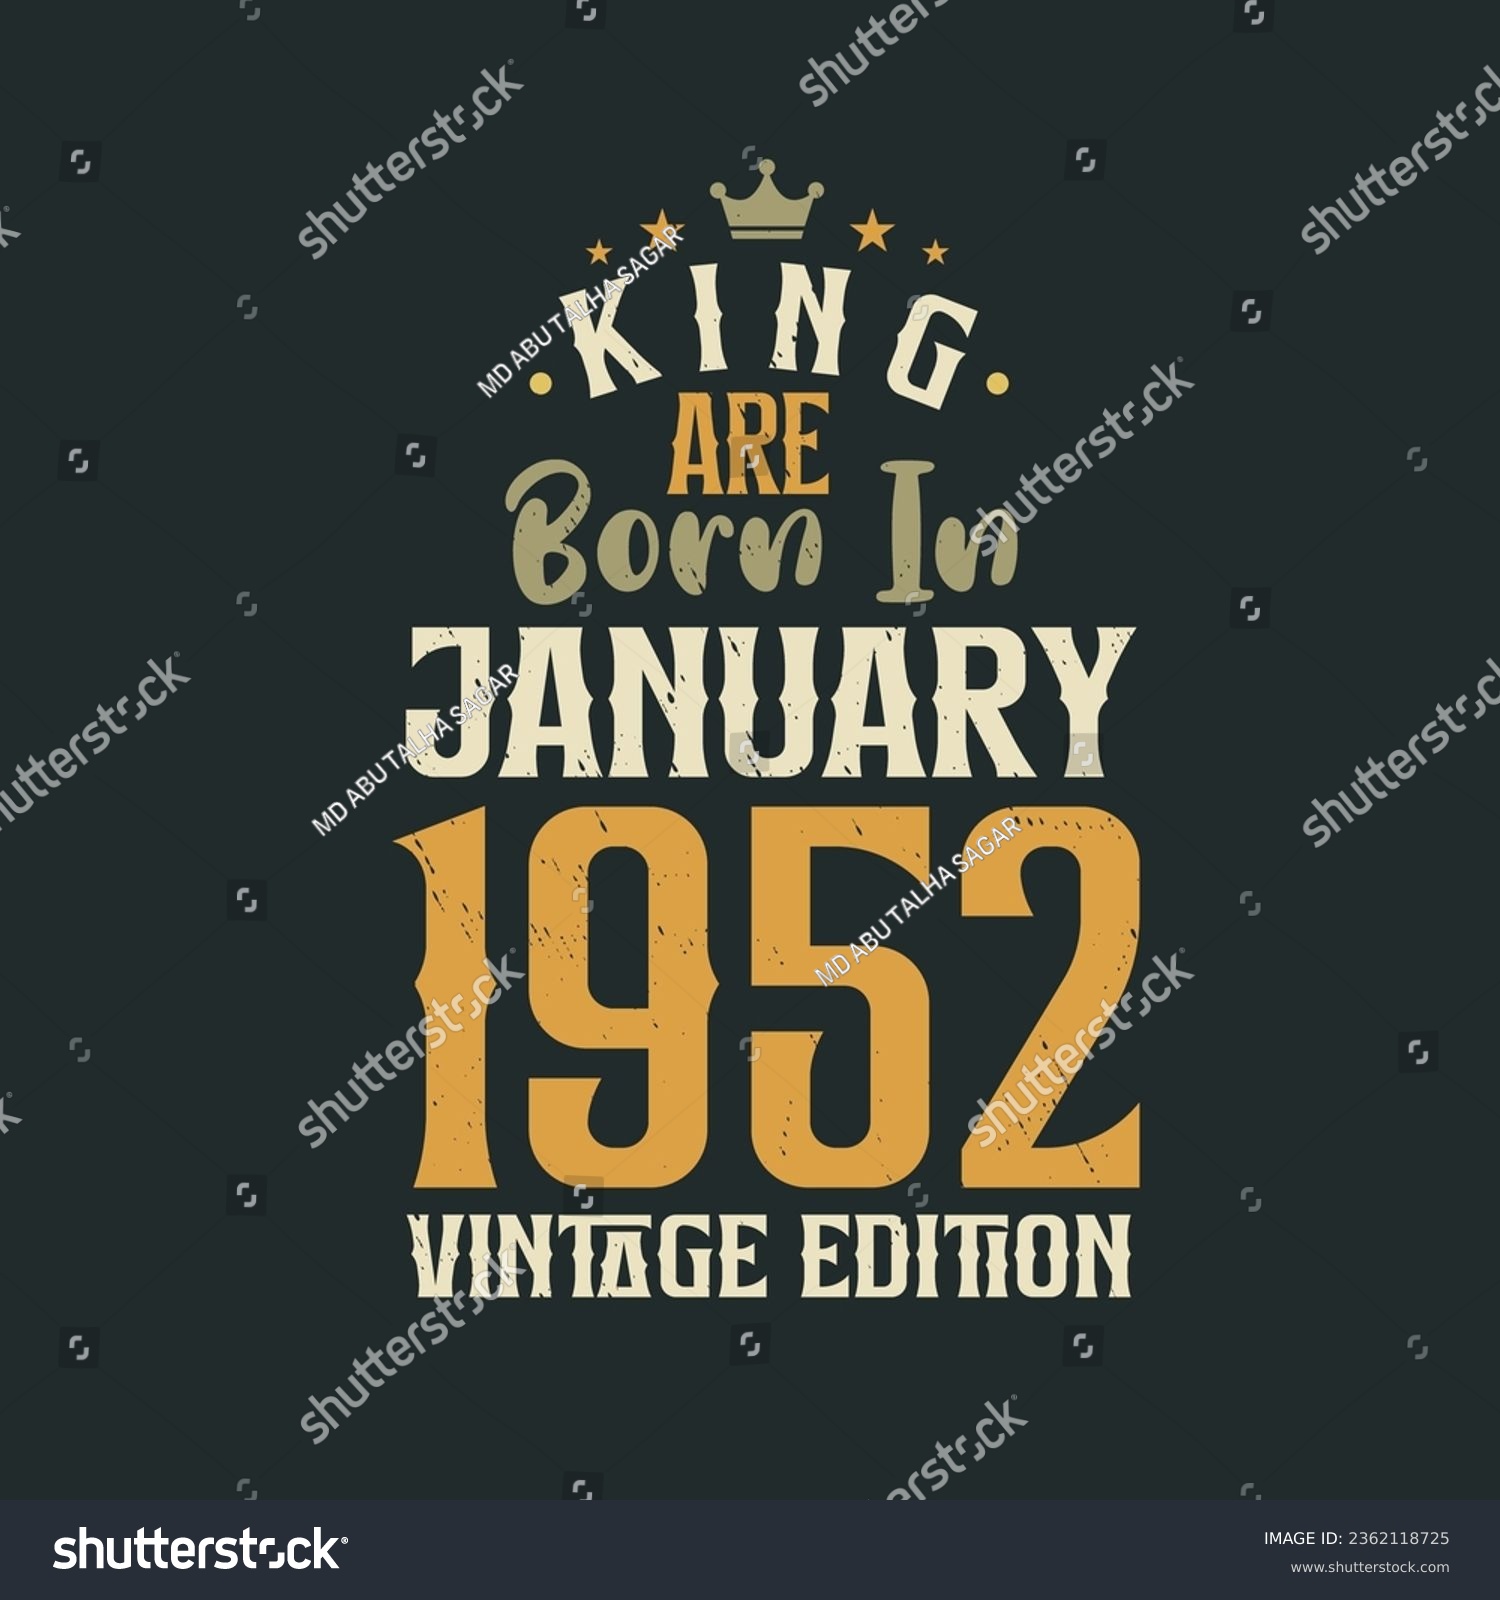 SVG of King are born in January 1952 Vintage edition. King are born in January 1952 Retro Vintage Birthday Vintage edition svg